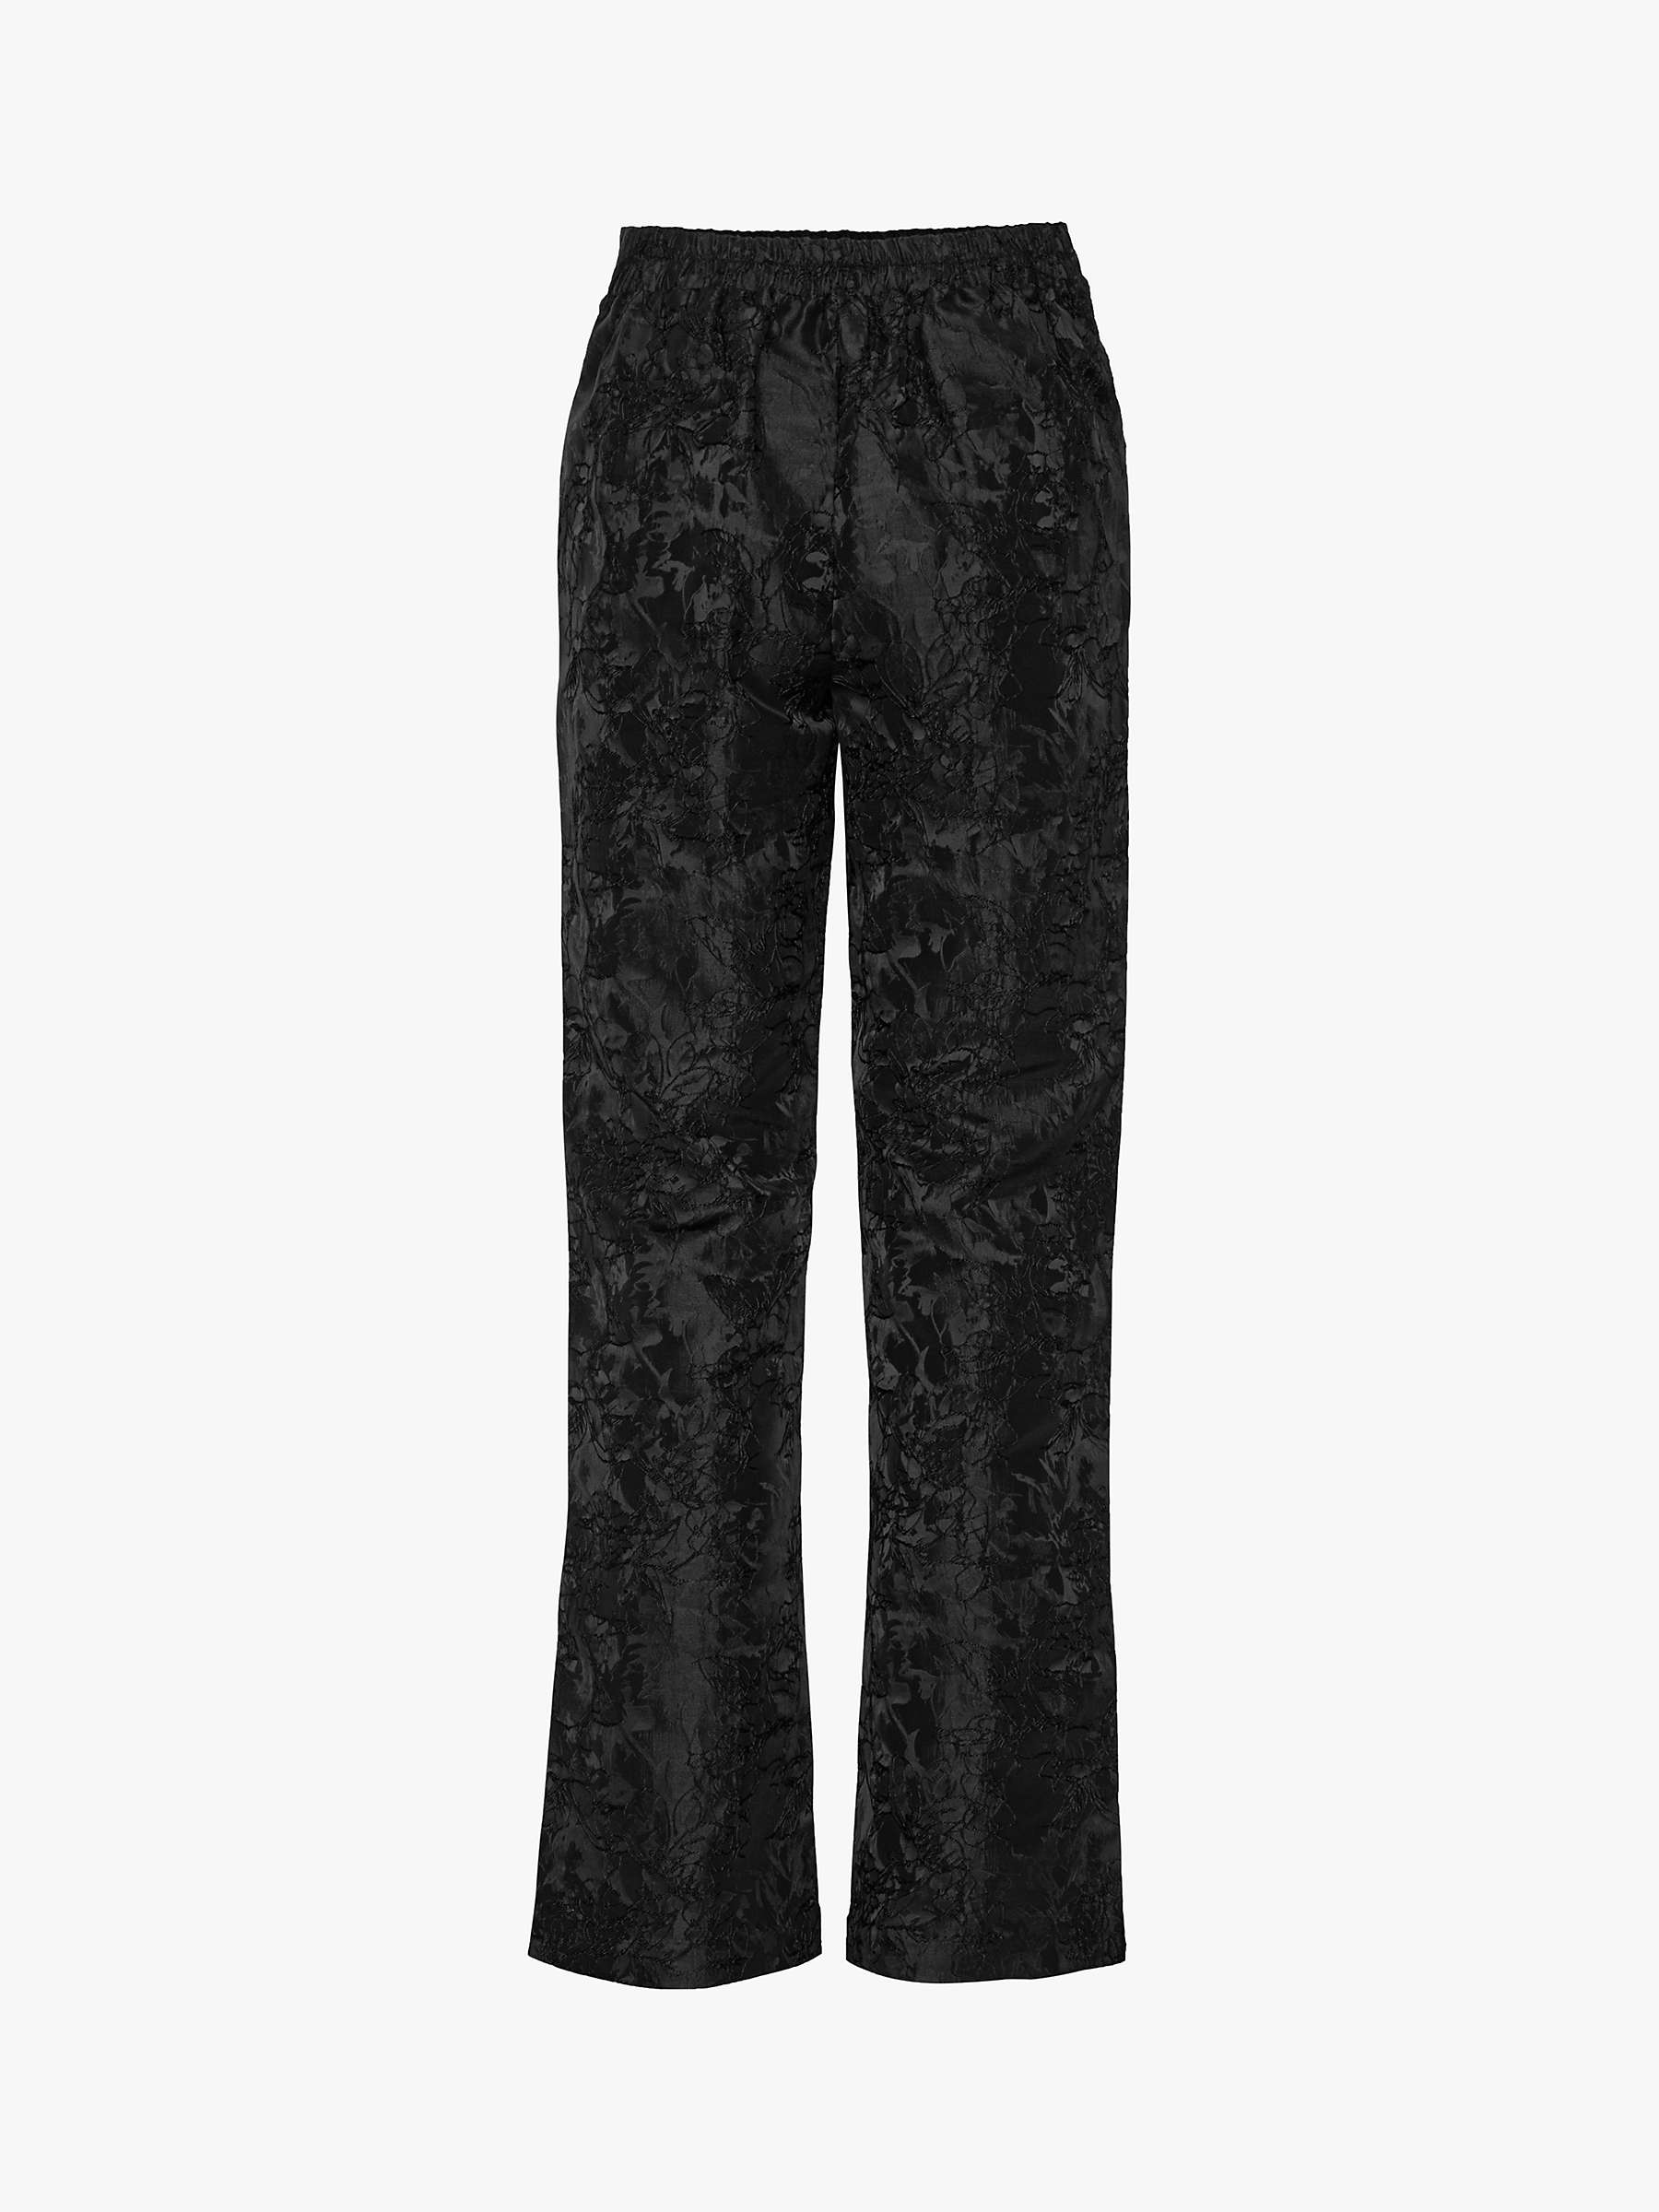 Buy A-VIEW Aria Trousers, Black Online at johnlewis.com